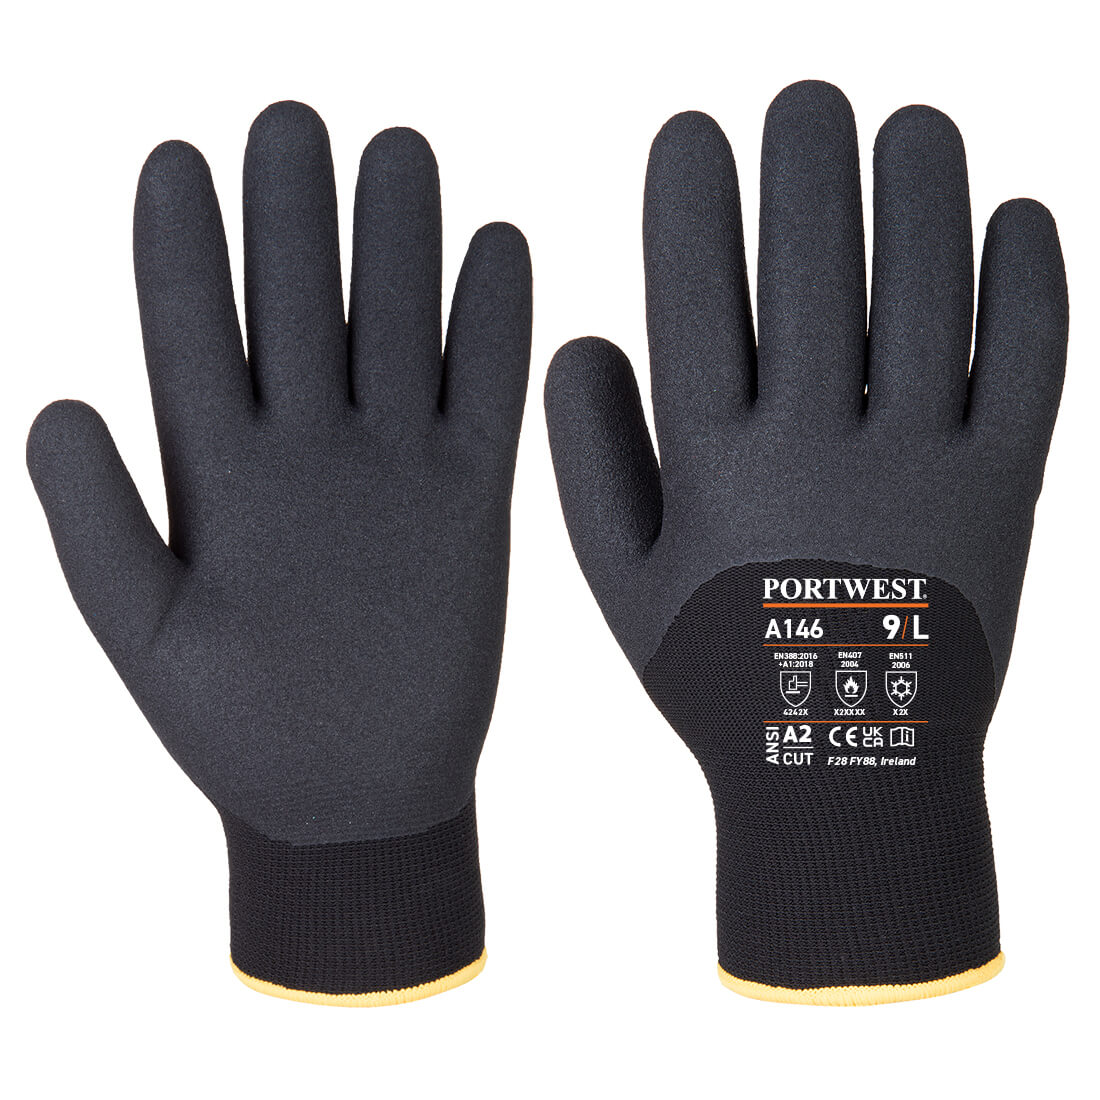 A146 Portwest® 3/4 Dipped Arctic Winter Cut Safety Work Gloves